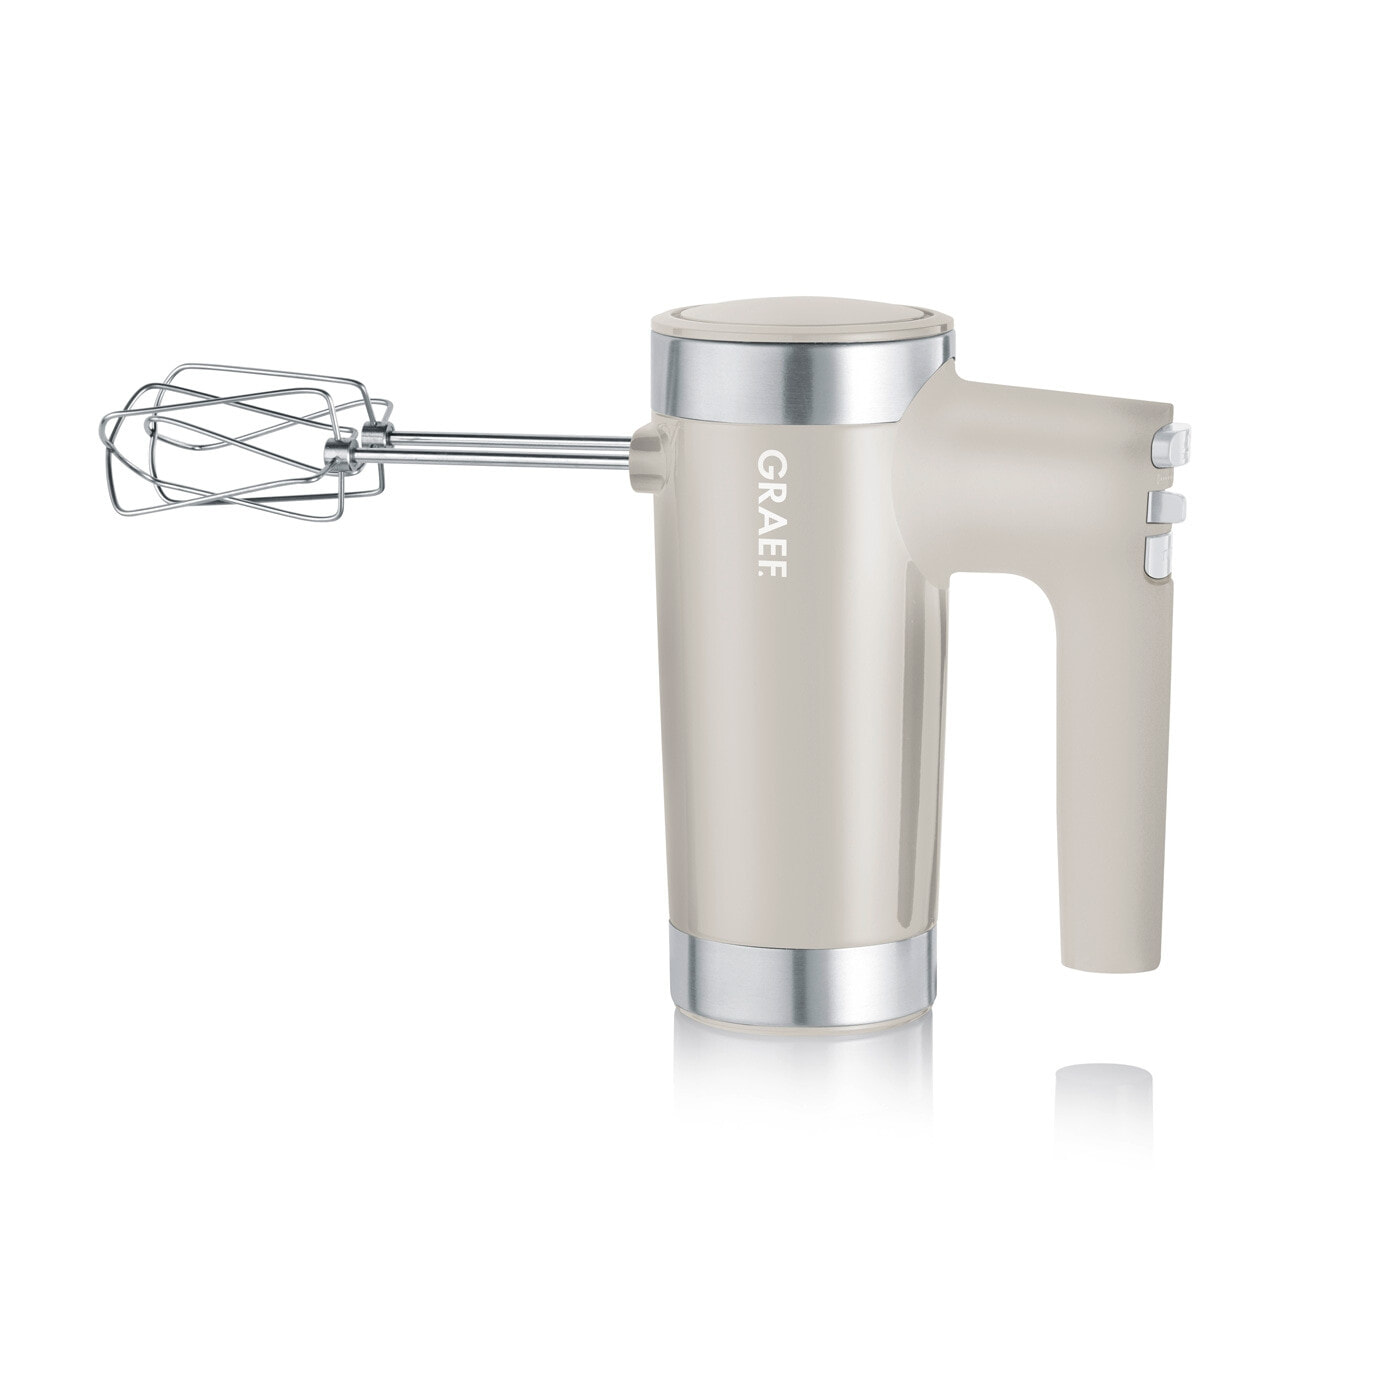 Graef HM508 - Hand mixer - Taupe - Beat - Knead - Mixing - Stirring - 1.65 m - 1080 RPM - Buttons